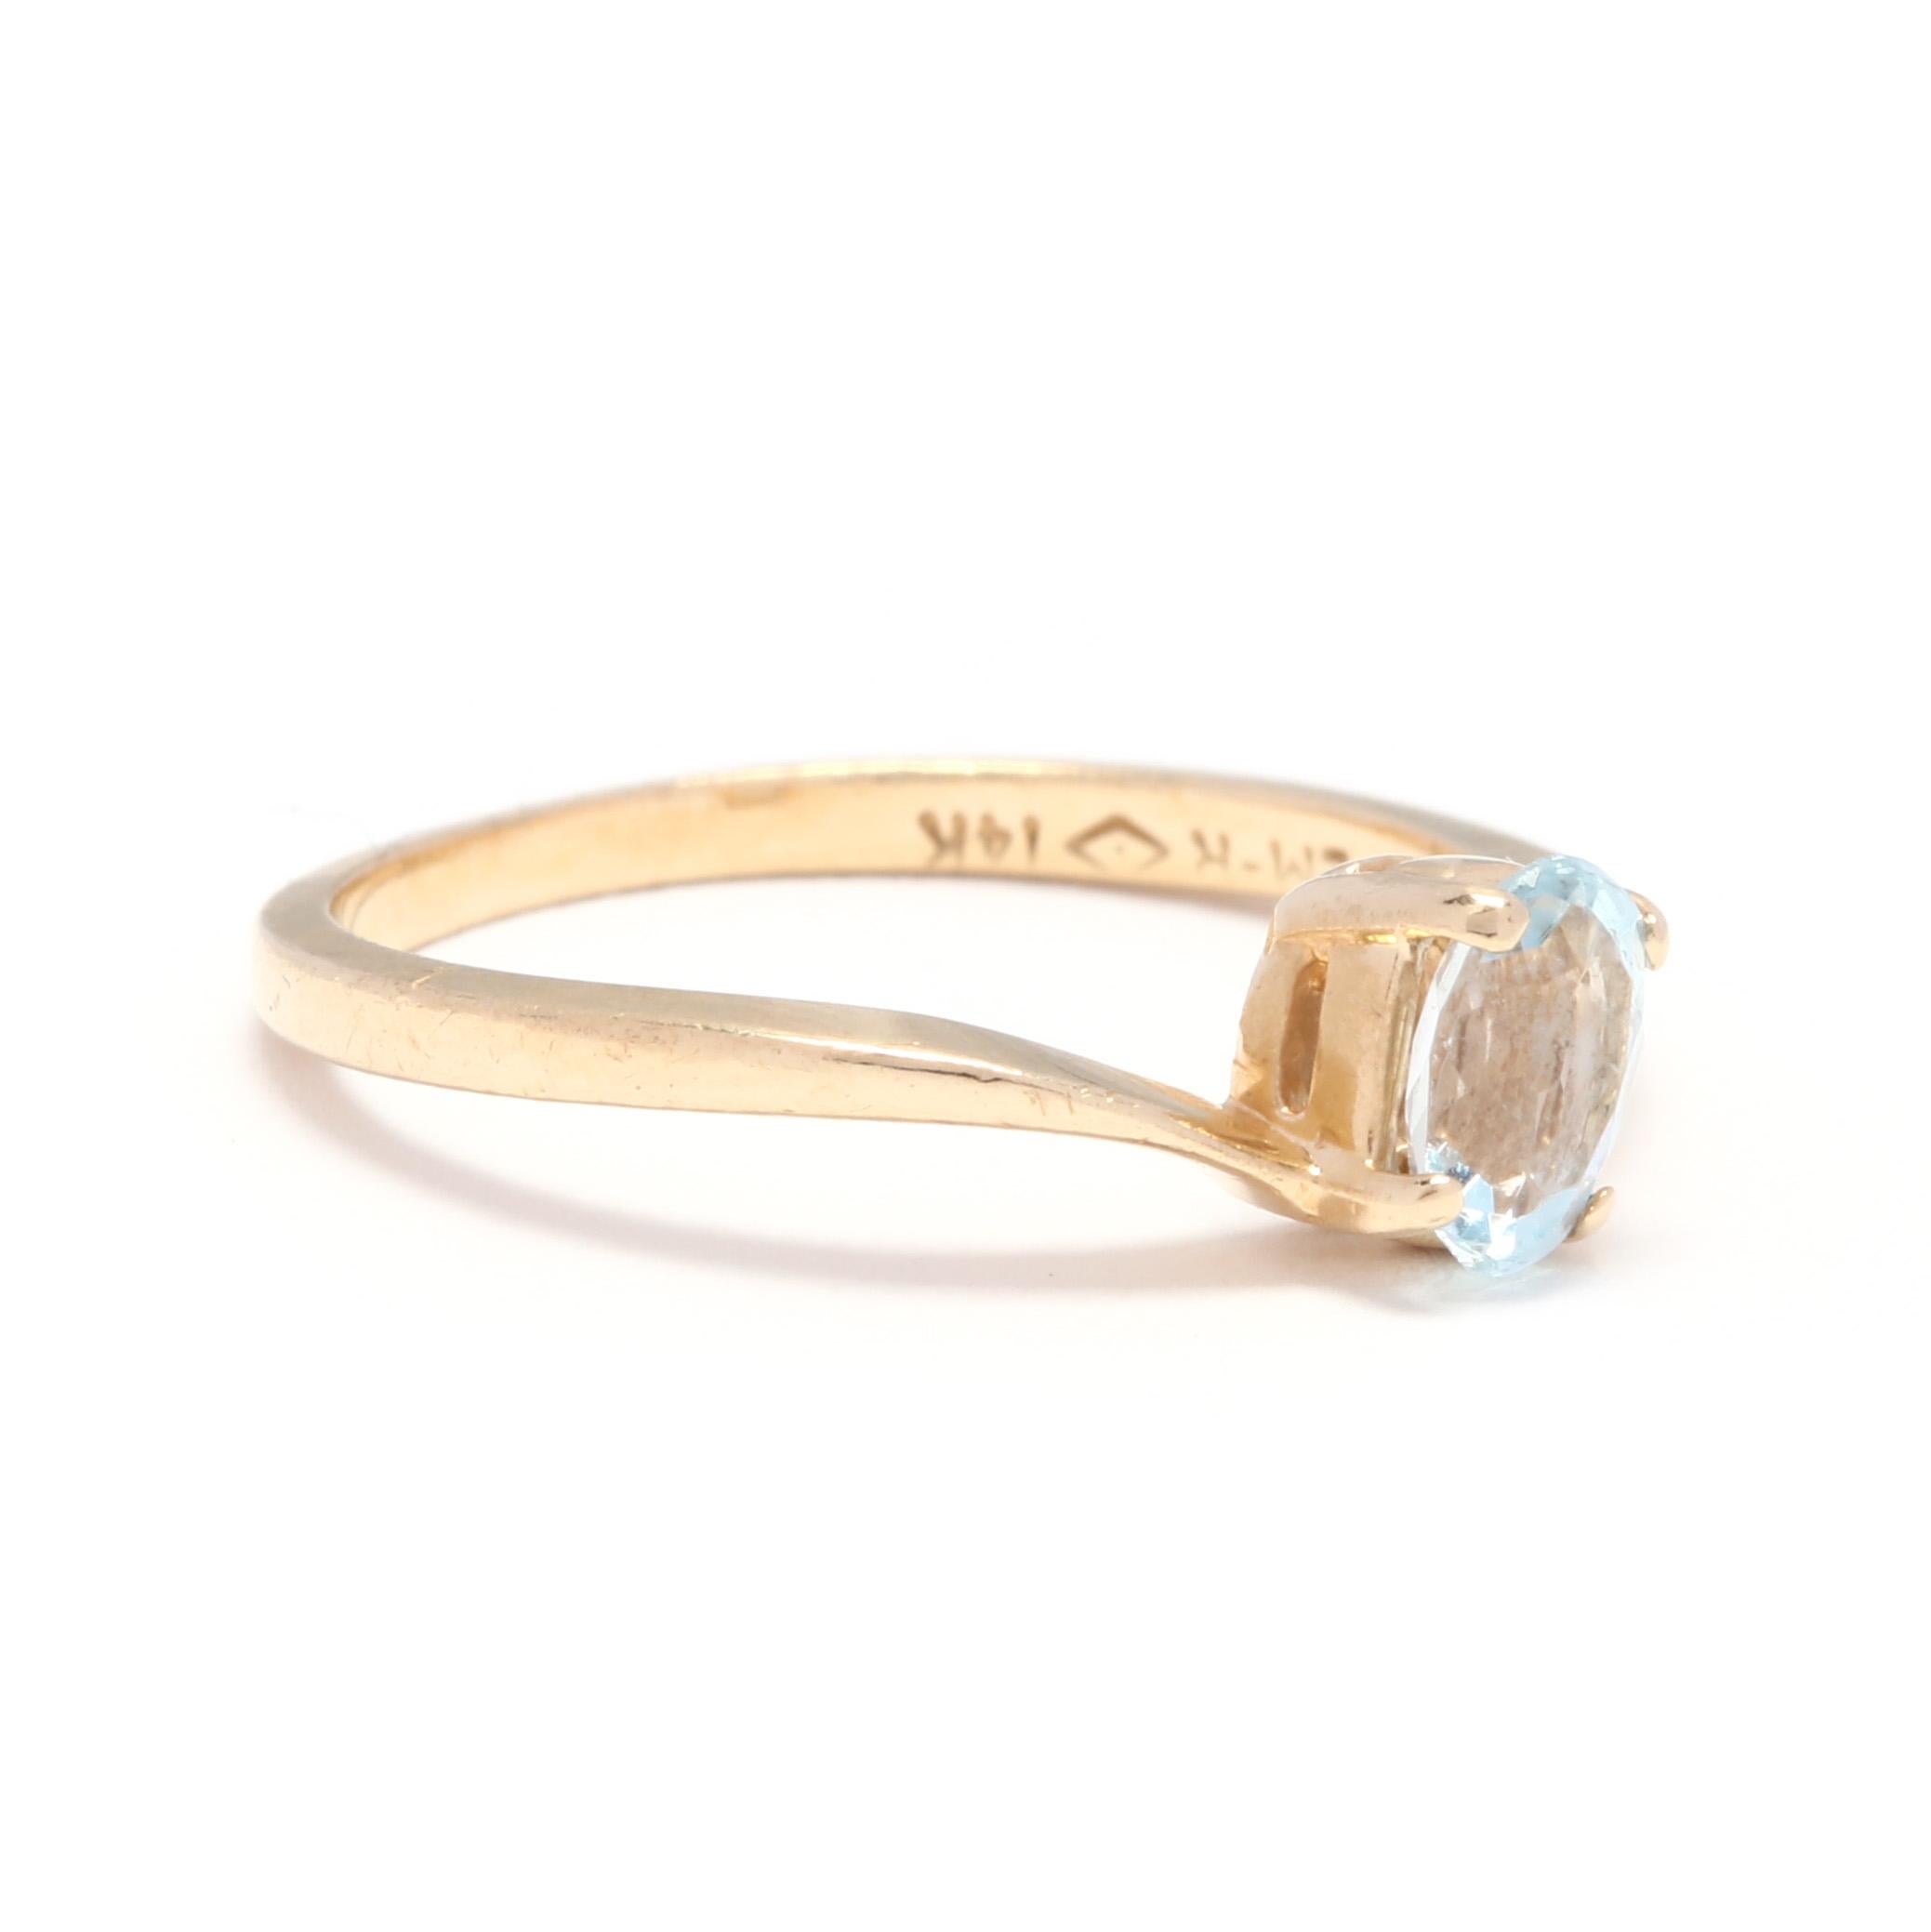 A 14 karat yellow gold and blue topaz bypass ring solitaire ring. This ring features a prong set, oval cut blue topaz stone set in a bypass mounting and with a slightly tapered shank.

Stone:
- blue topaz
- oval cut, 1 stone
- 6 x 4 mm

Ring Size